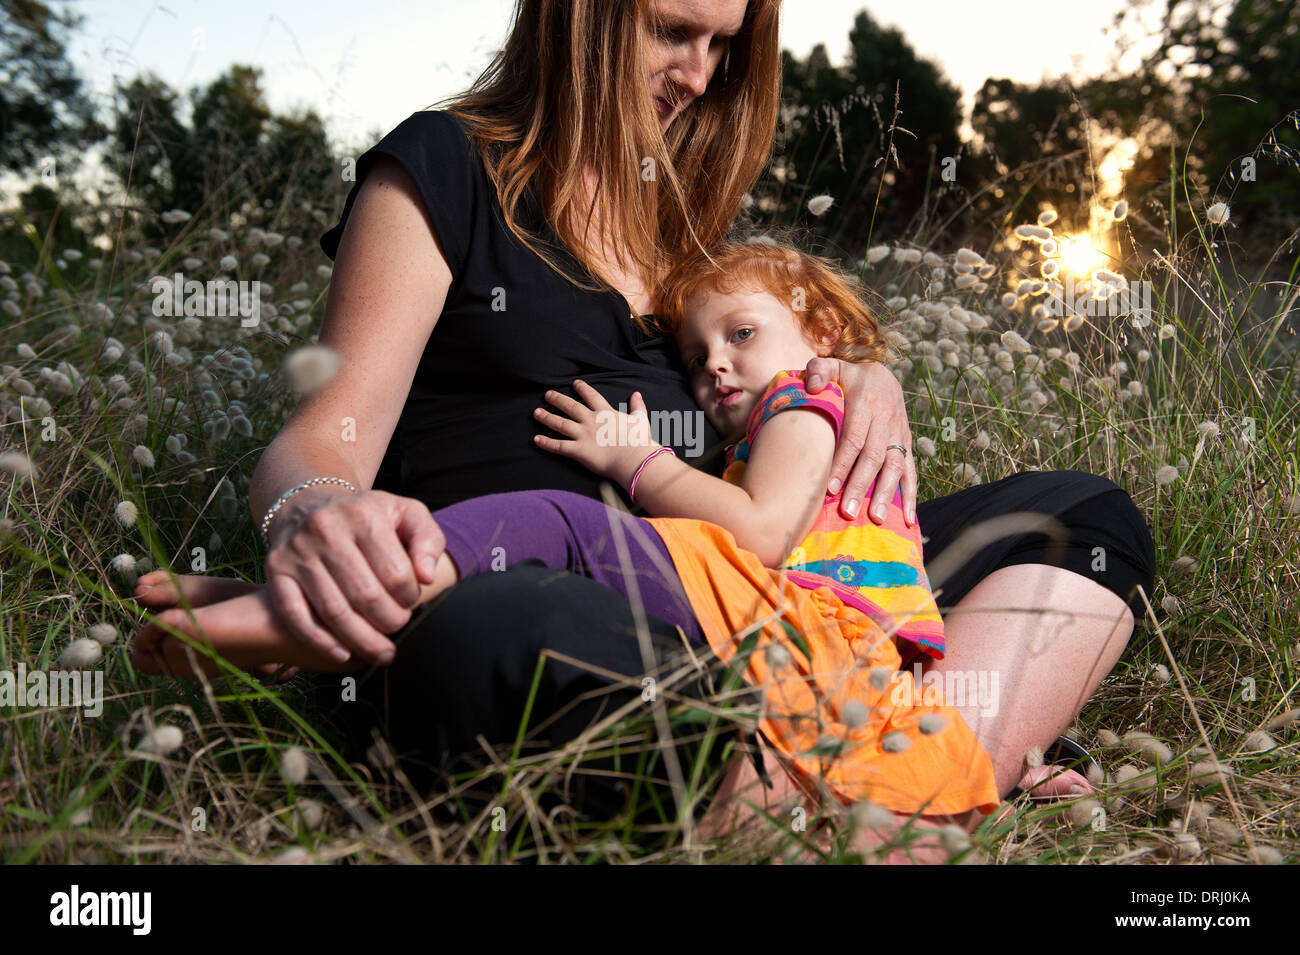 Toddler sitting on her pregnant mother's lap in a field during sunset. Stock Photo